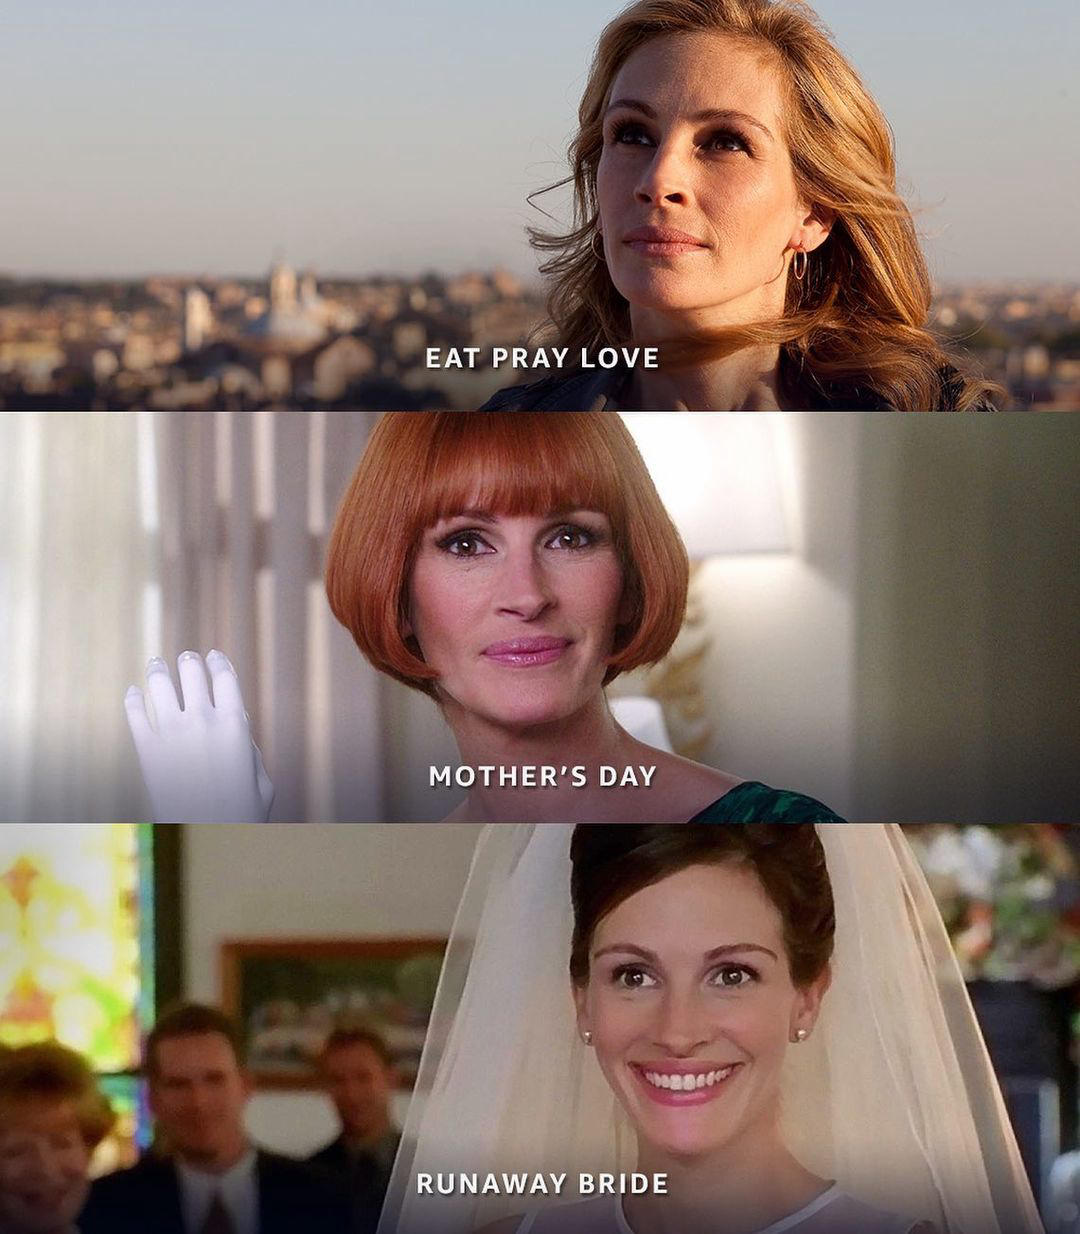 Prime Video - Pick one Julia Roberts character to eat with, one to pray with, and one to love